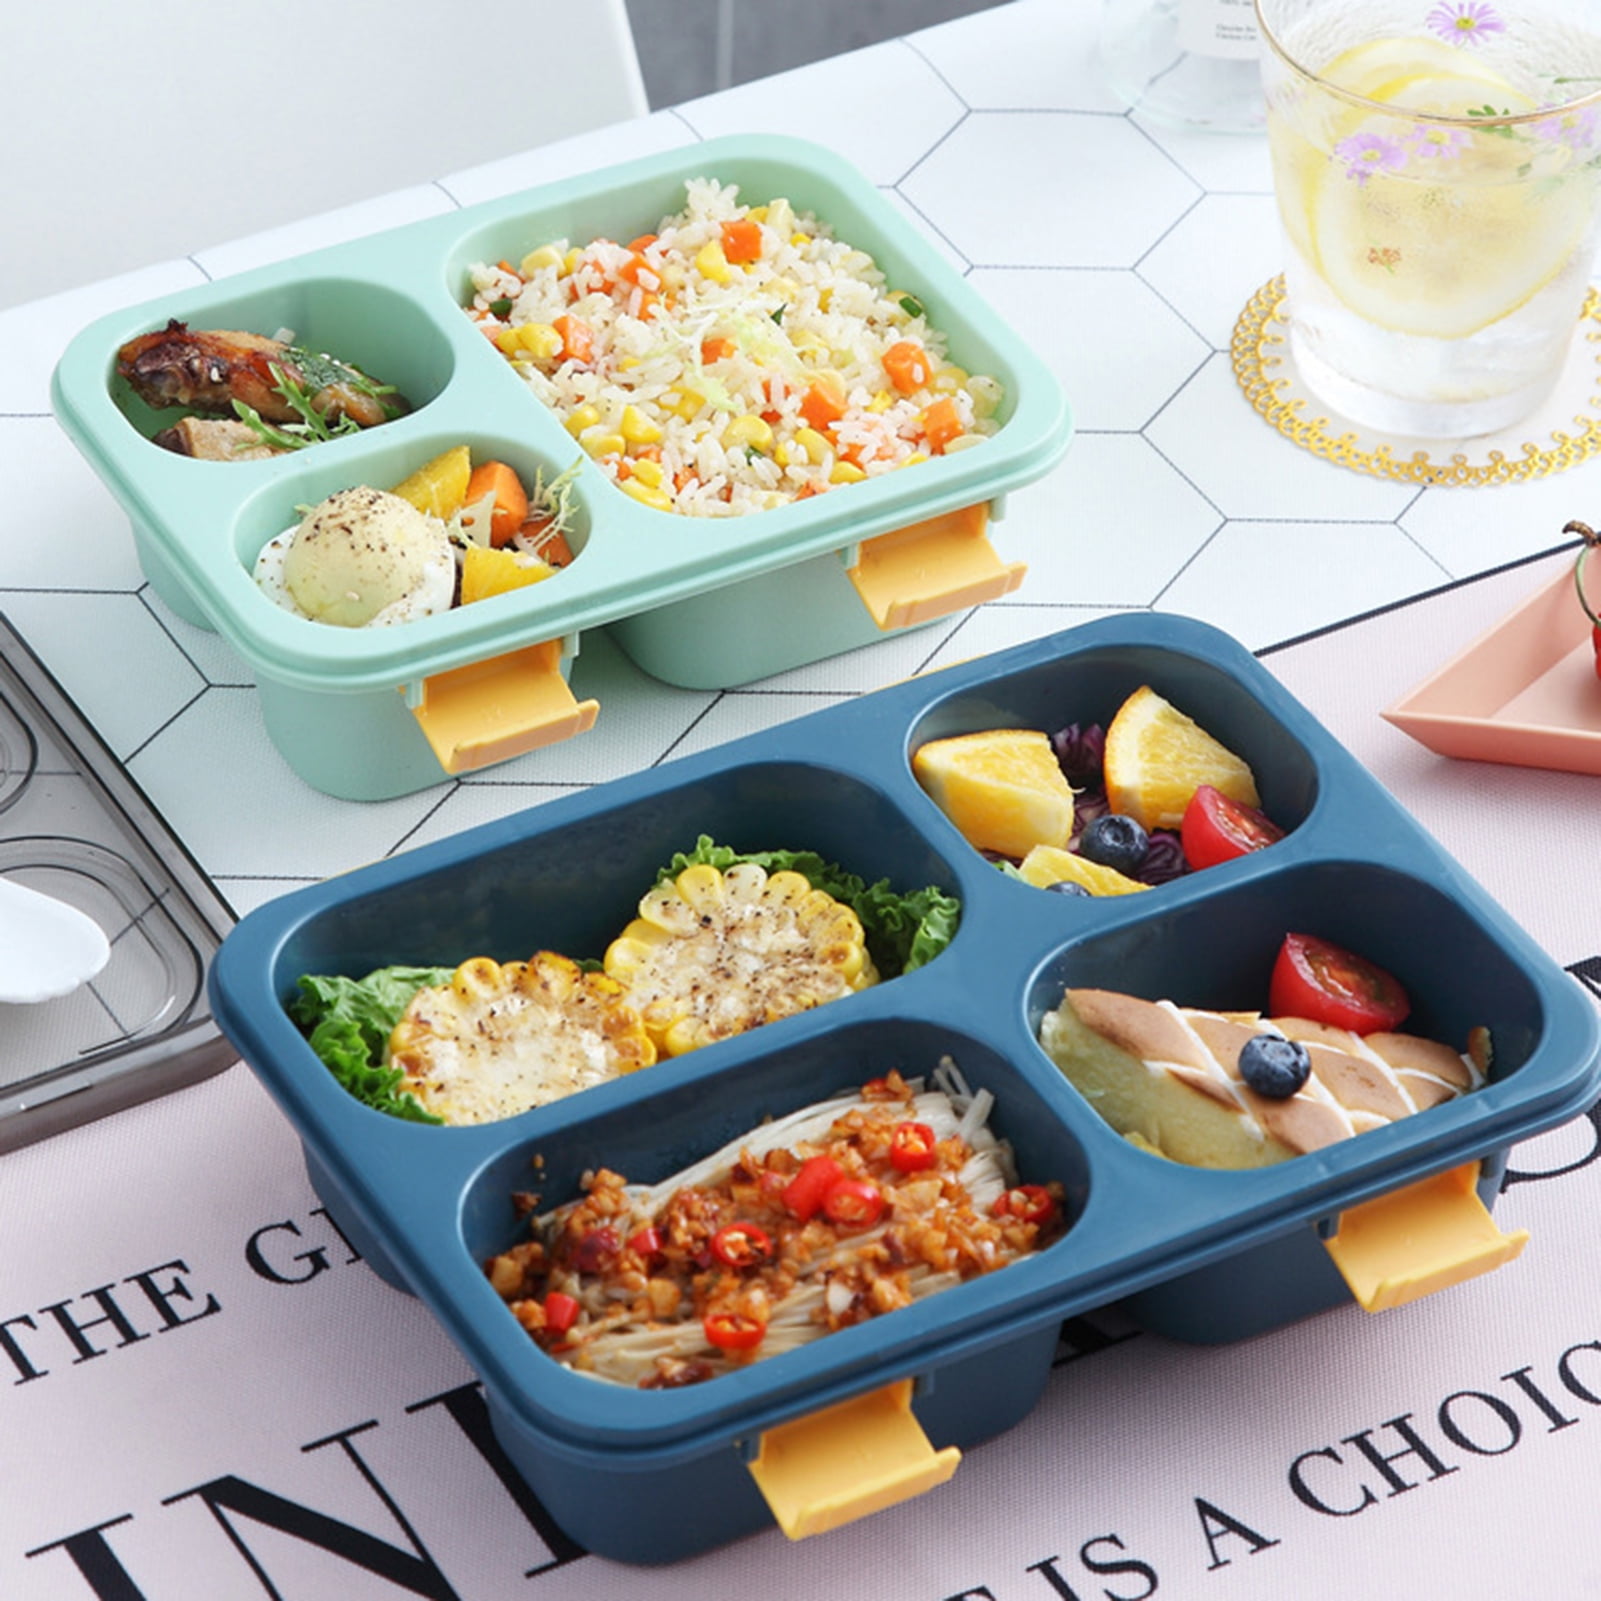 Finorder 6 Pack 4-Compartment Food Containers, Reusable Snack Containers  for Kids Adults School Work Picnic, Lunch Bento Box Meal Prep Containers